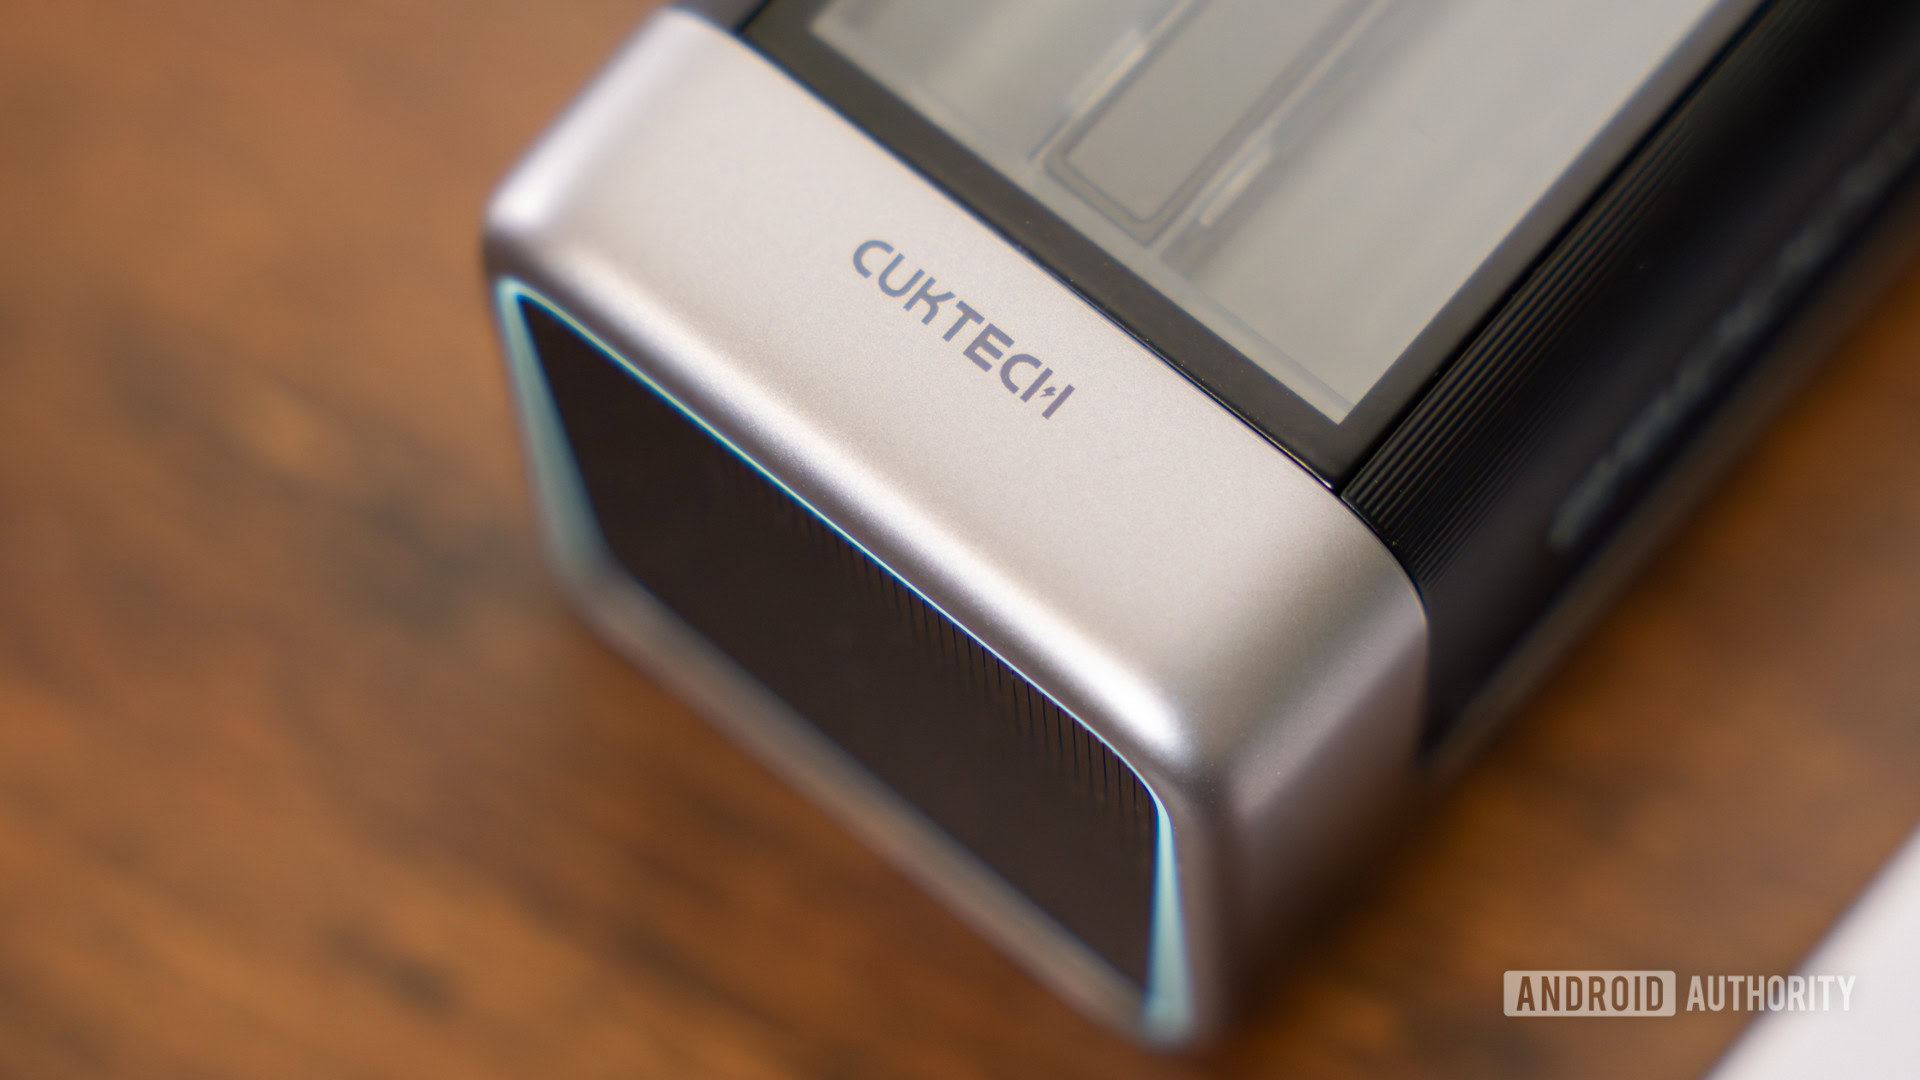 CUKTECH 20 Power Bank on table showing logo